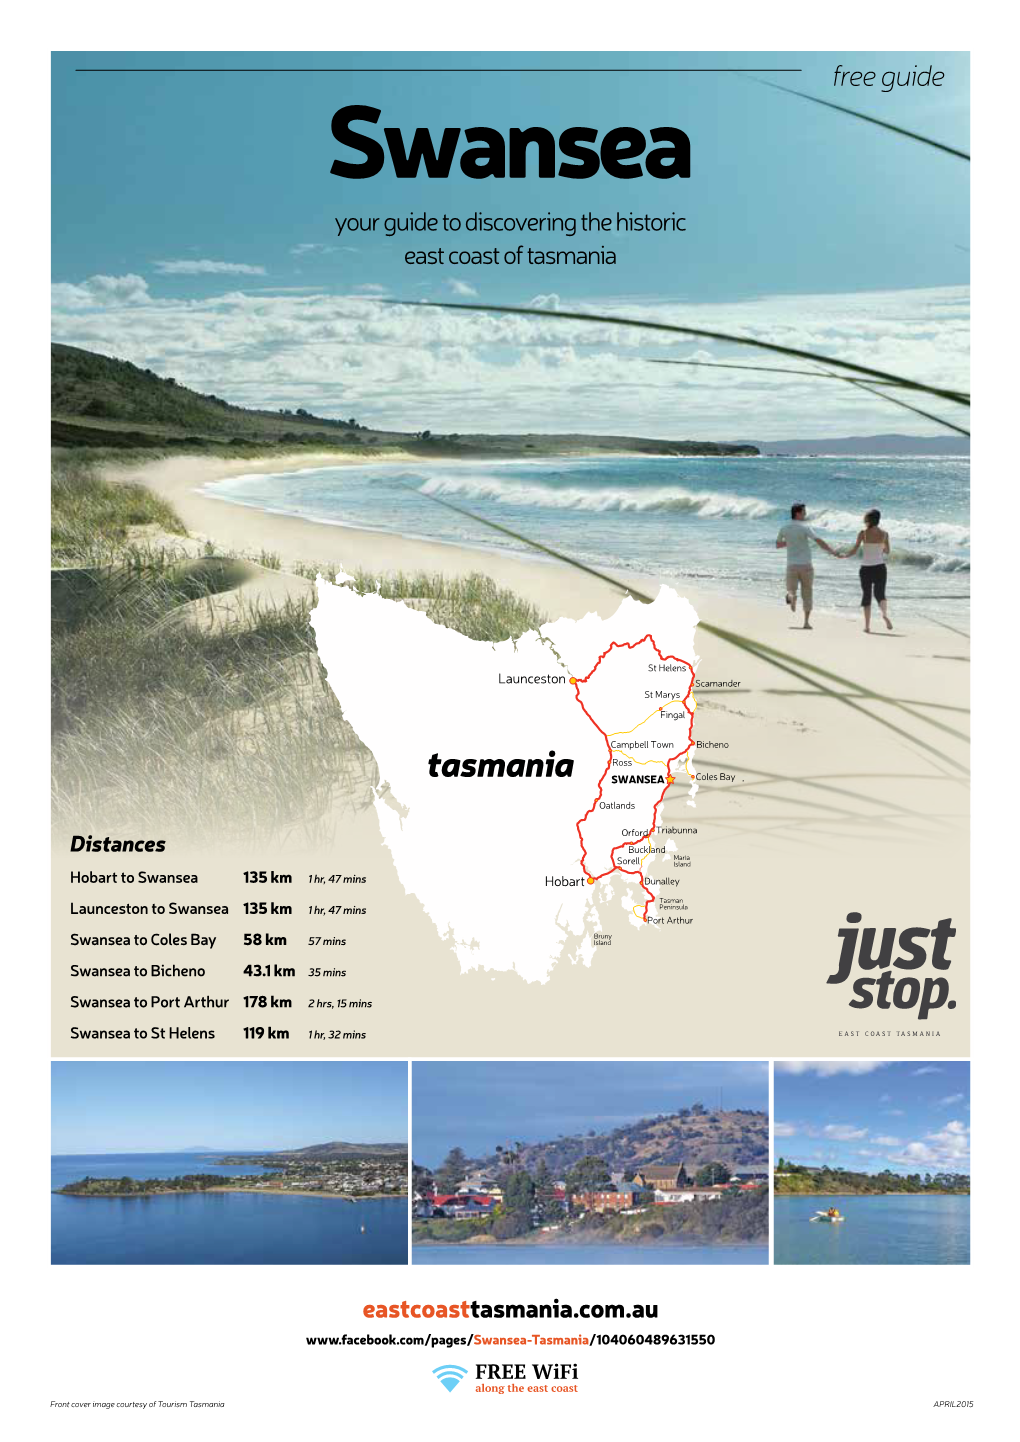 Swansea Your Guide to Discovering the Historic East Coast of Tasmania